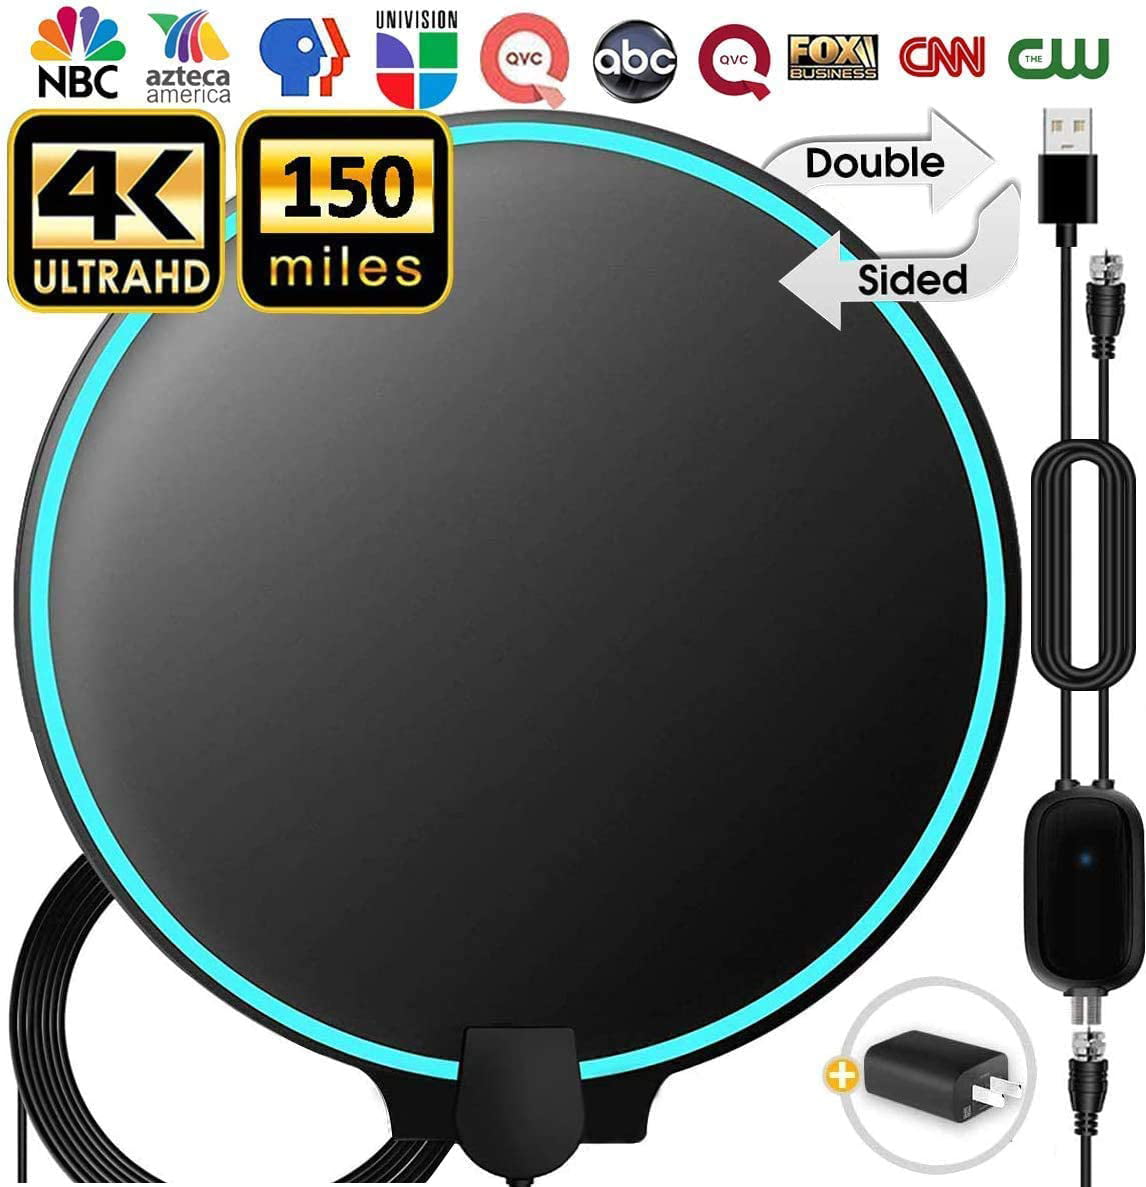 18ft Coax Cable/AC Adap TV Antenna Indoor Amplified HD Digital Television Antenna Long 80-120 Miles Range Support 4K 1080p and All Older TVs Powerful HDTV Amplifier Signal Booster 